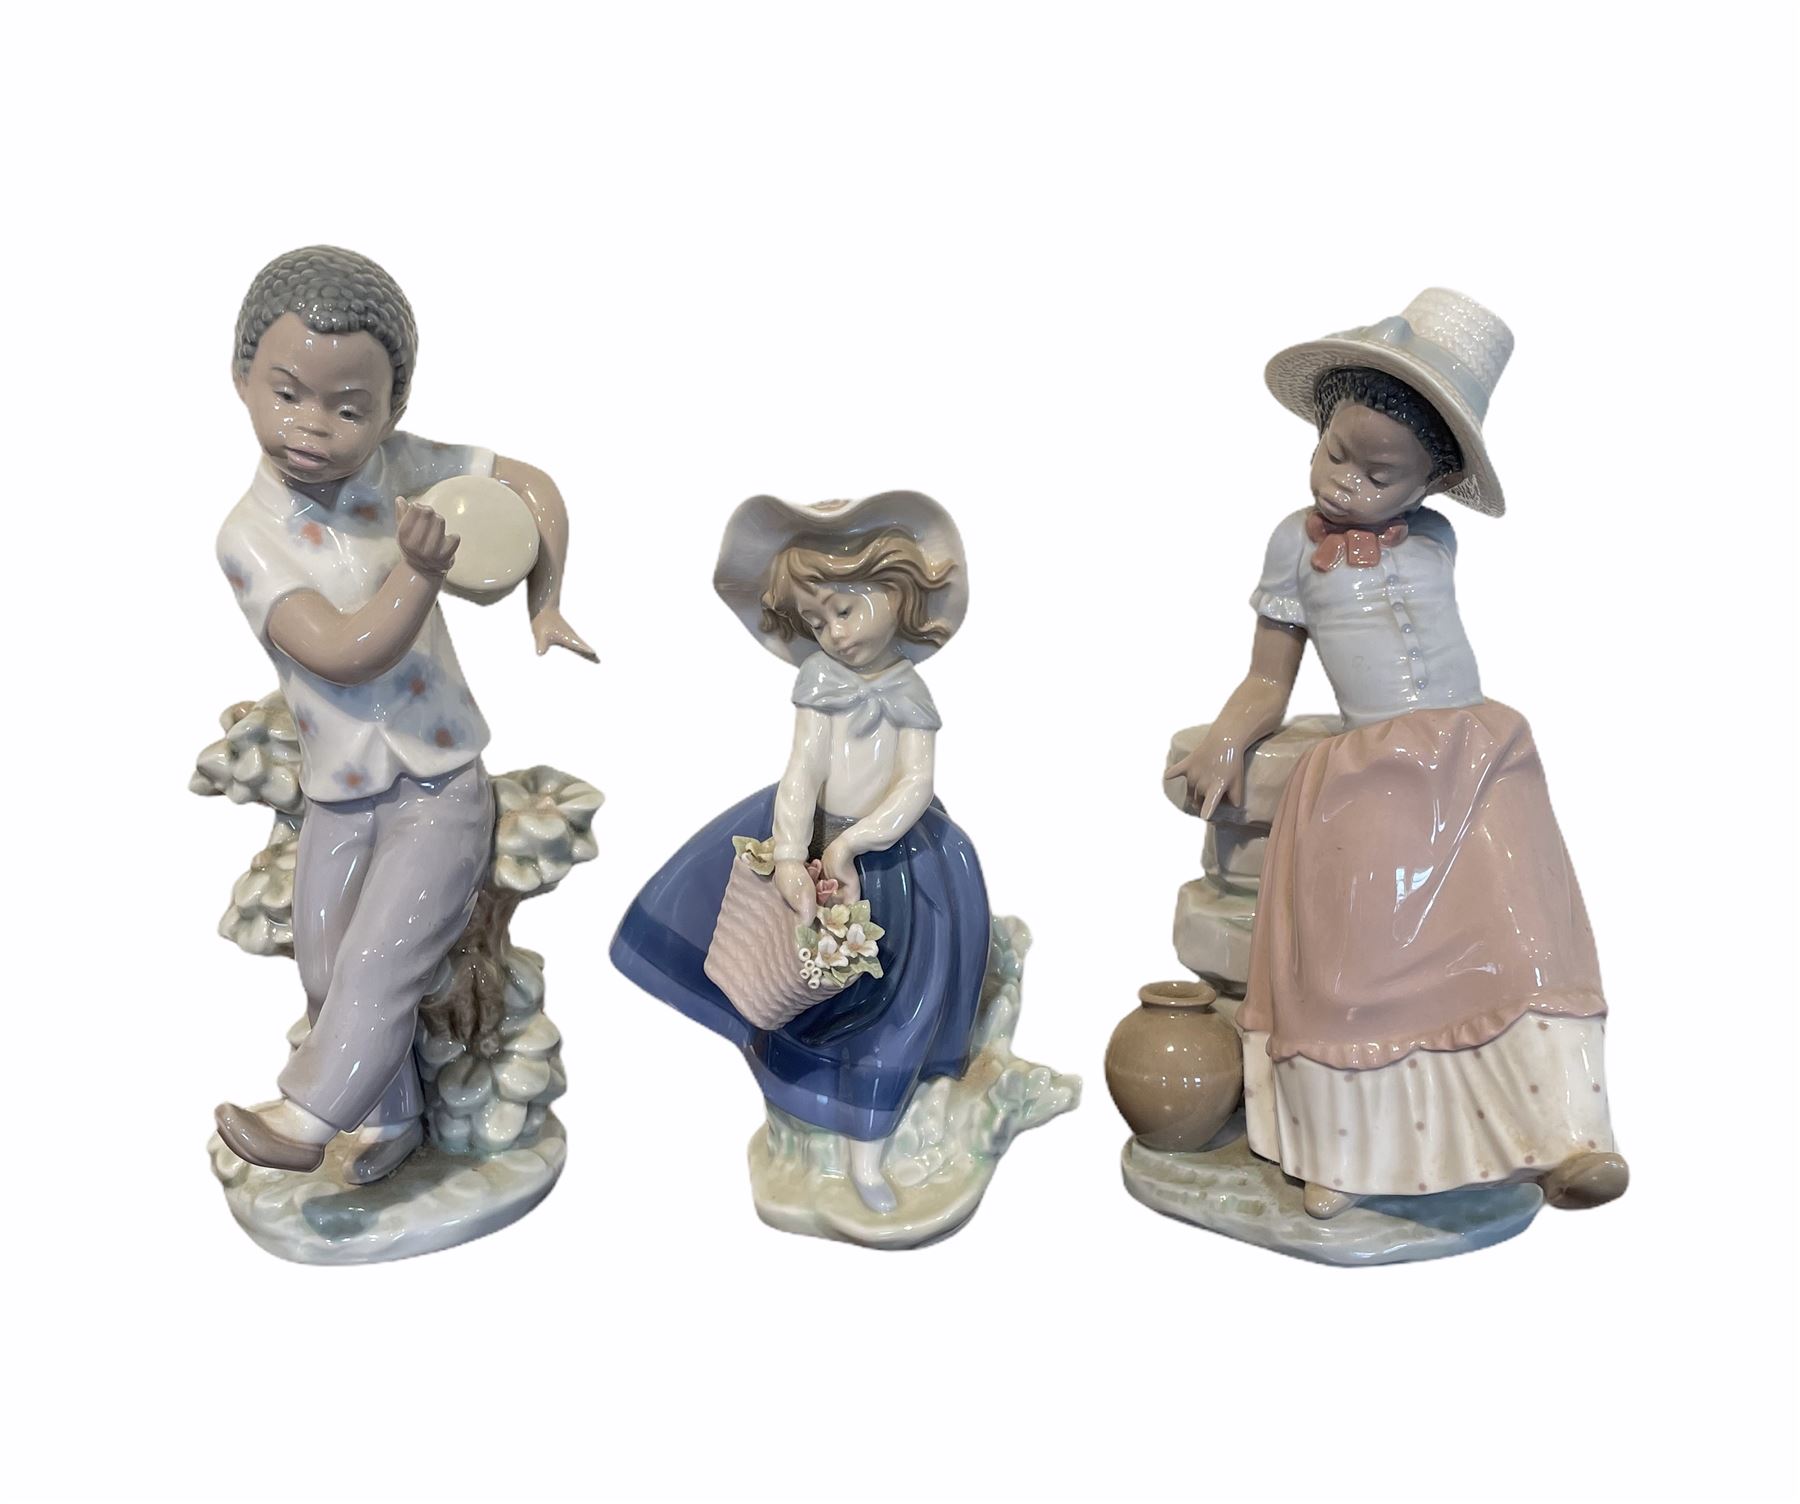 Pair of Lladro figures designed by Jose Roig 'Bongo Beat' No5157 and 'A Step in Time' No.5158 and a